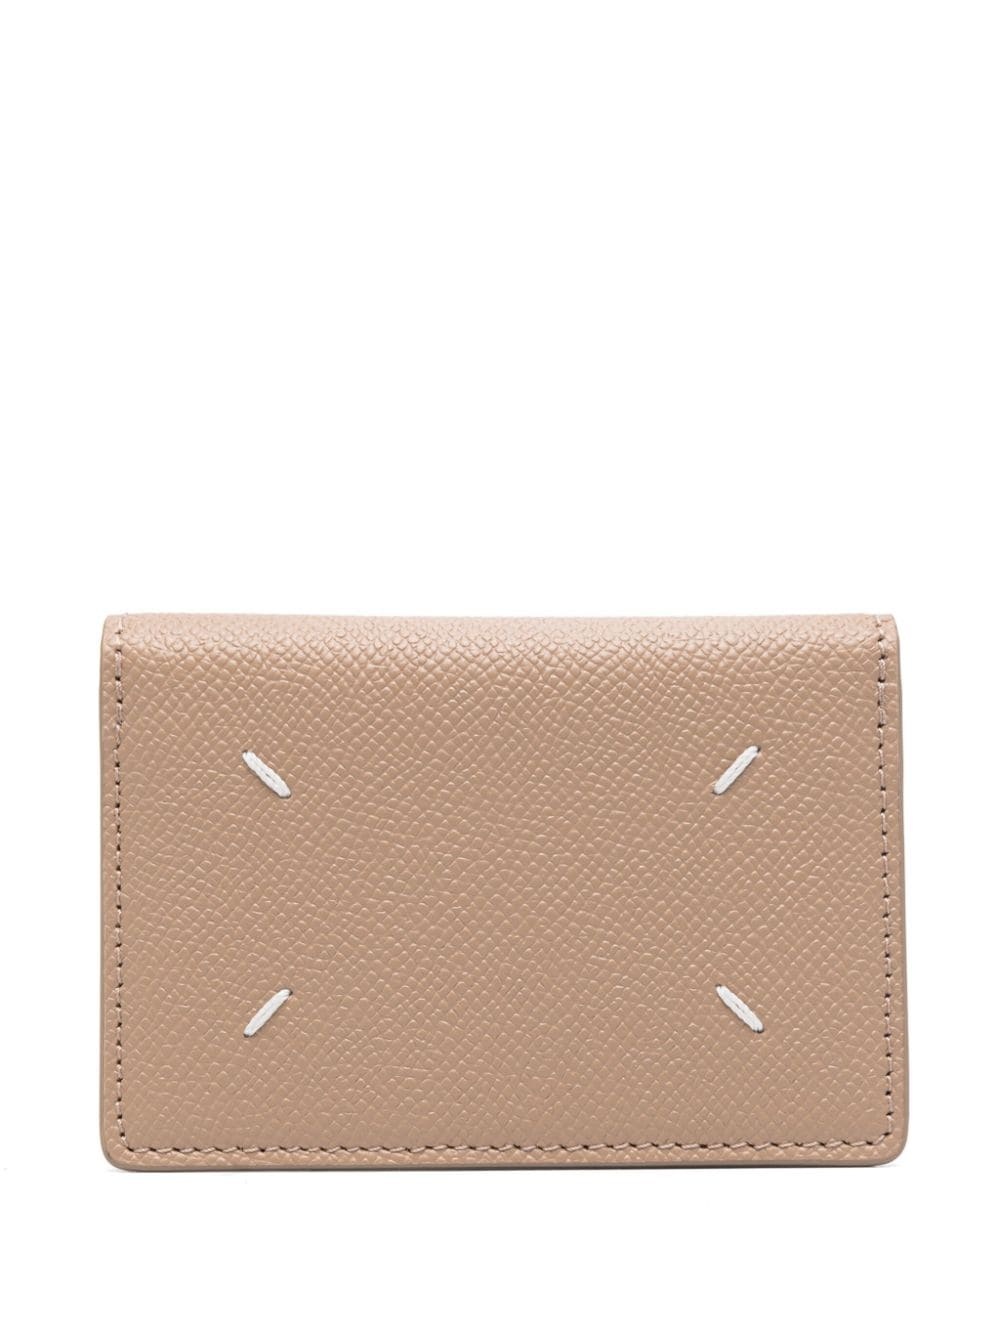 four-stitch leather wallet - 2